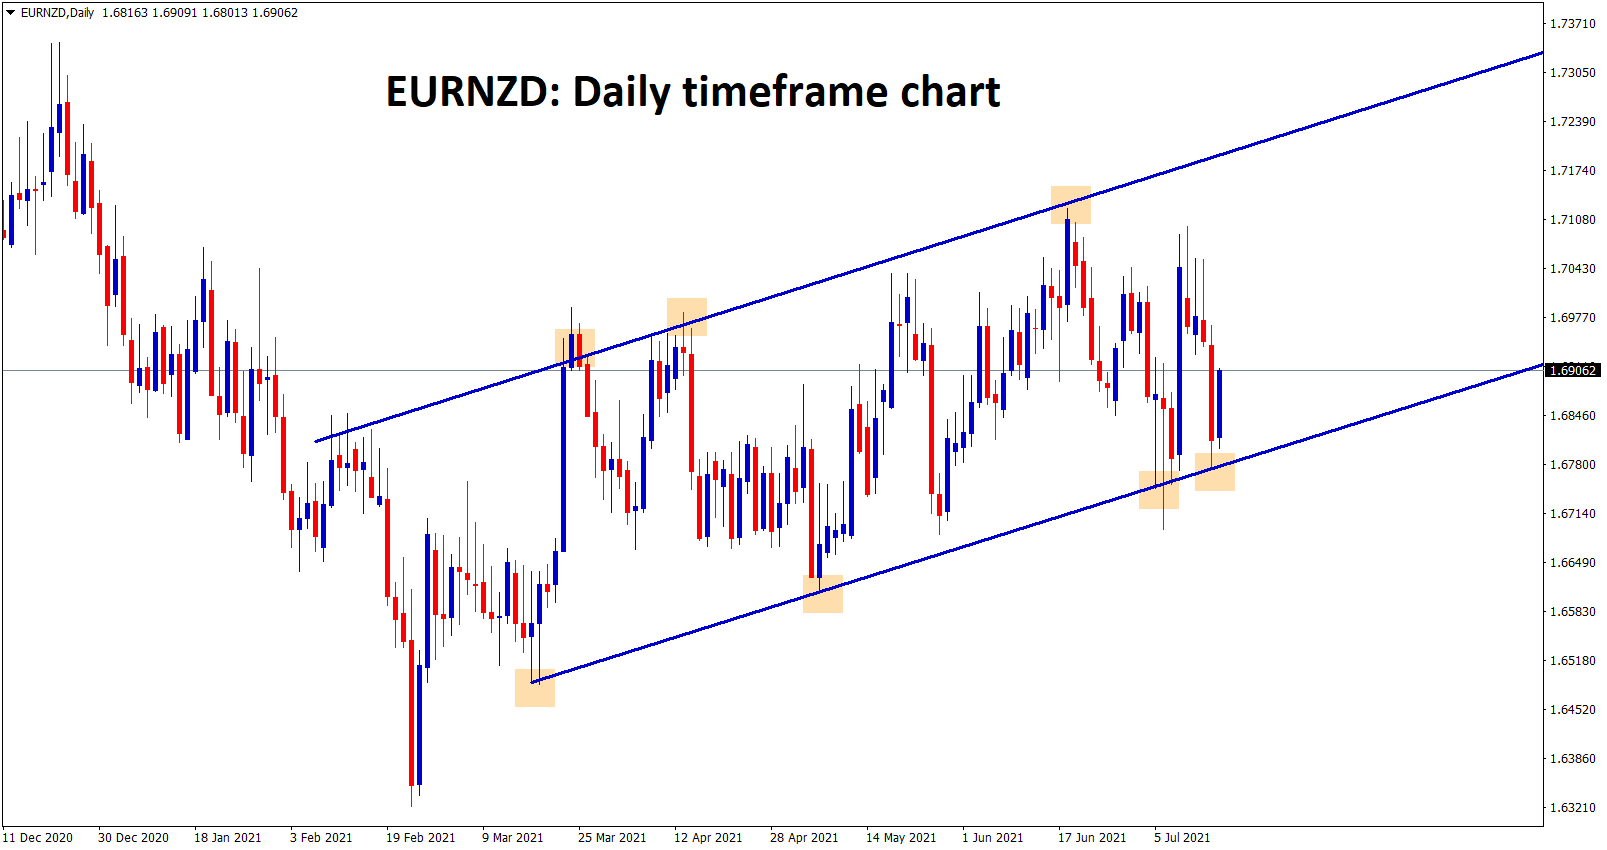 EURNZD bounces back from the higher low level of an Ascending channel